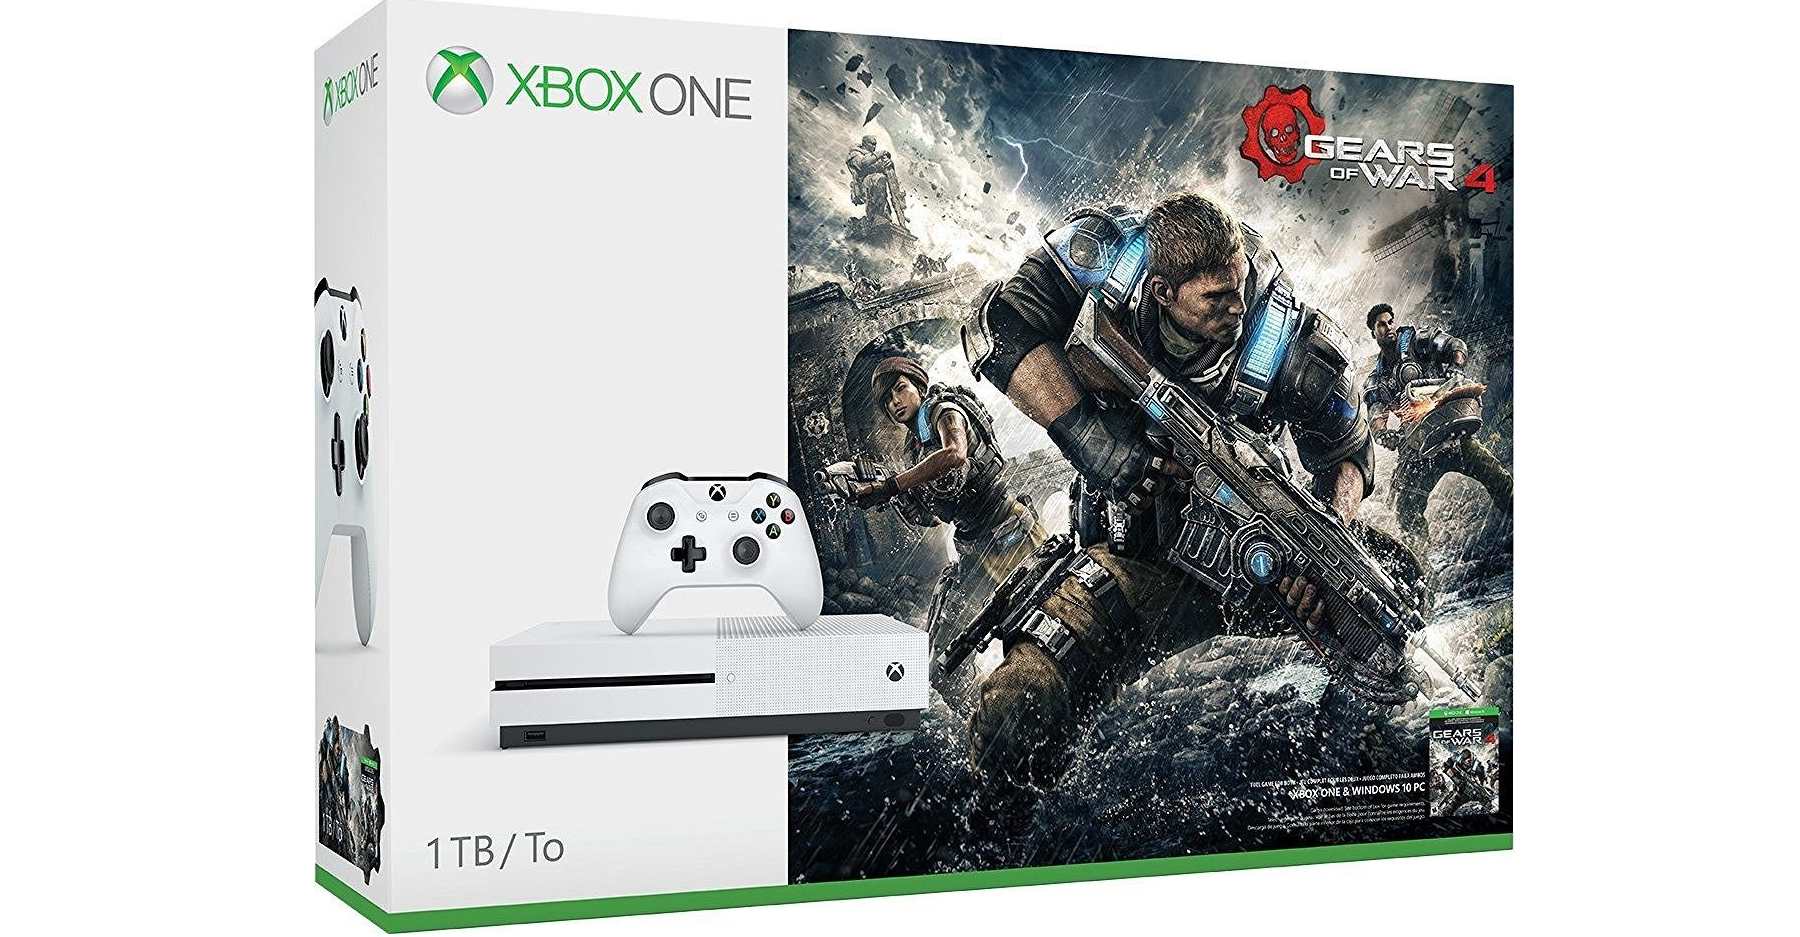 Xbox One S 1TB Console Bundle with Gears of War 4—$259.99!